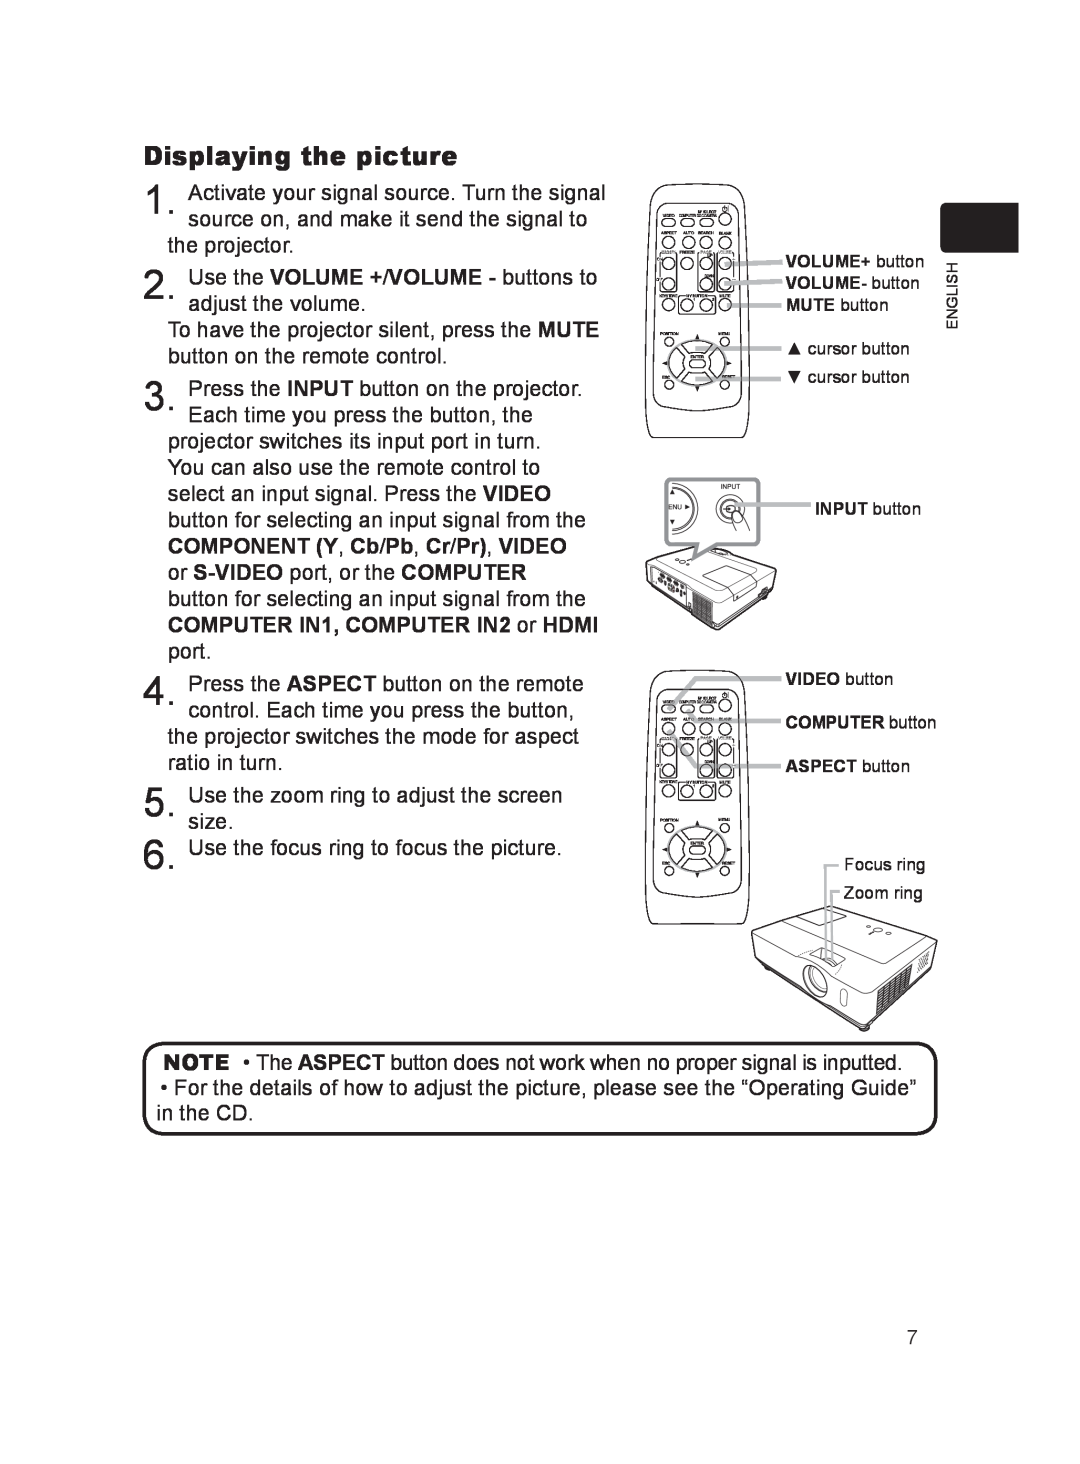 Dukane 8917H user manual Displaying the picture 